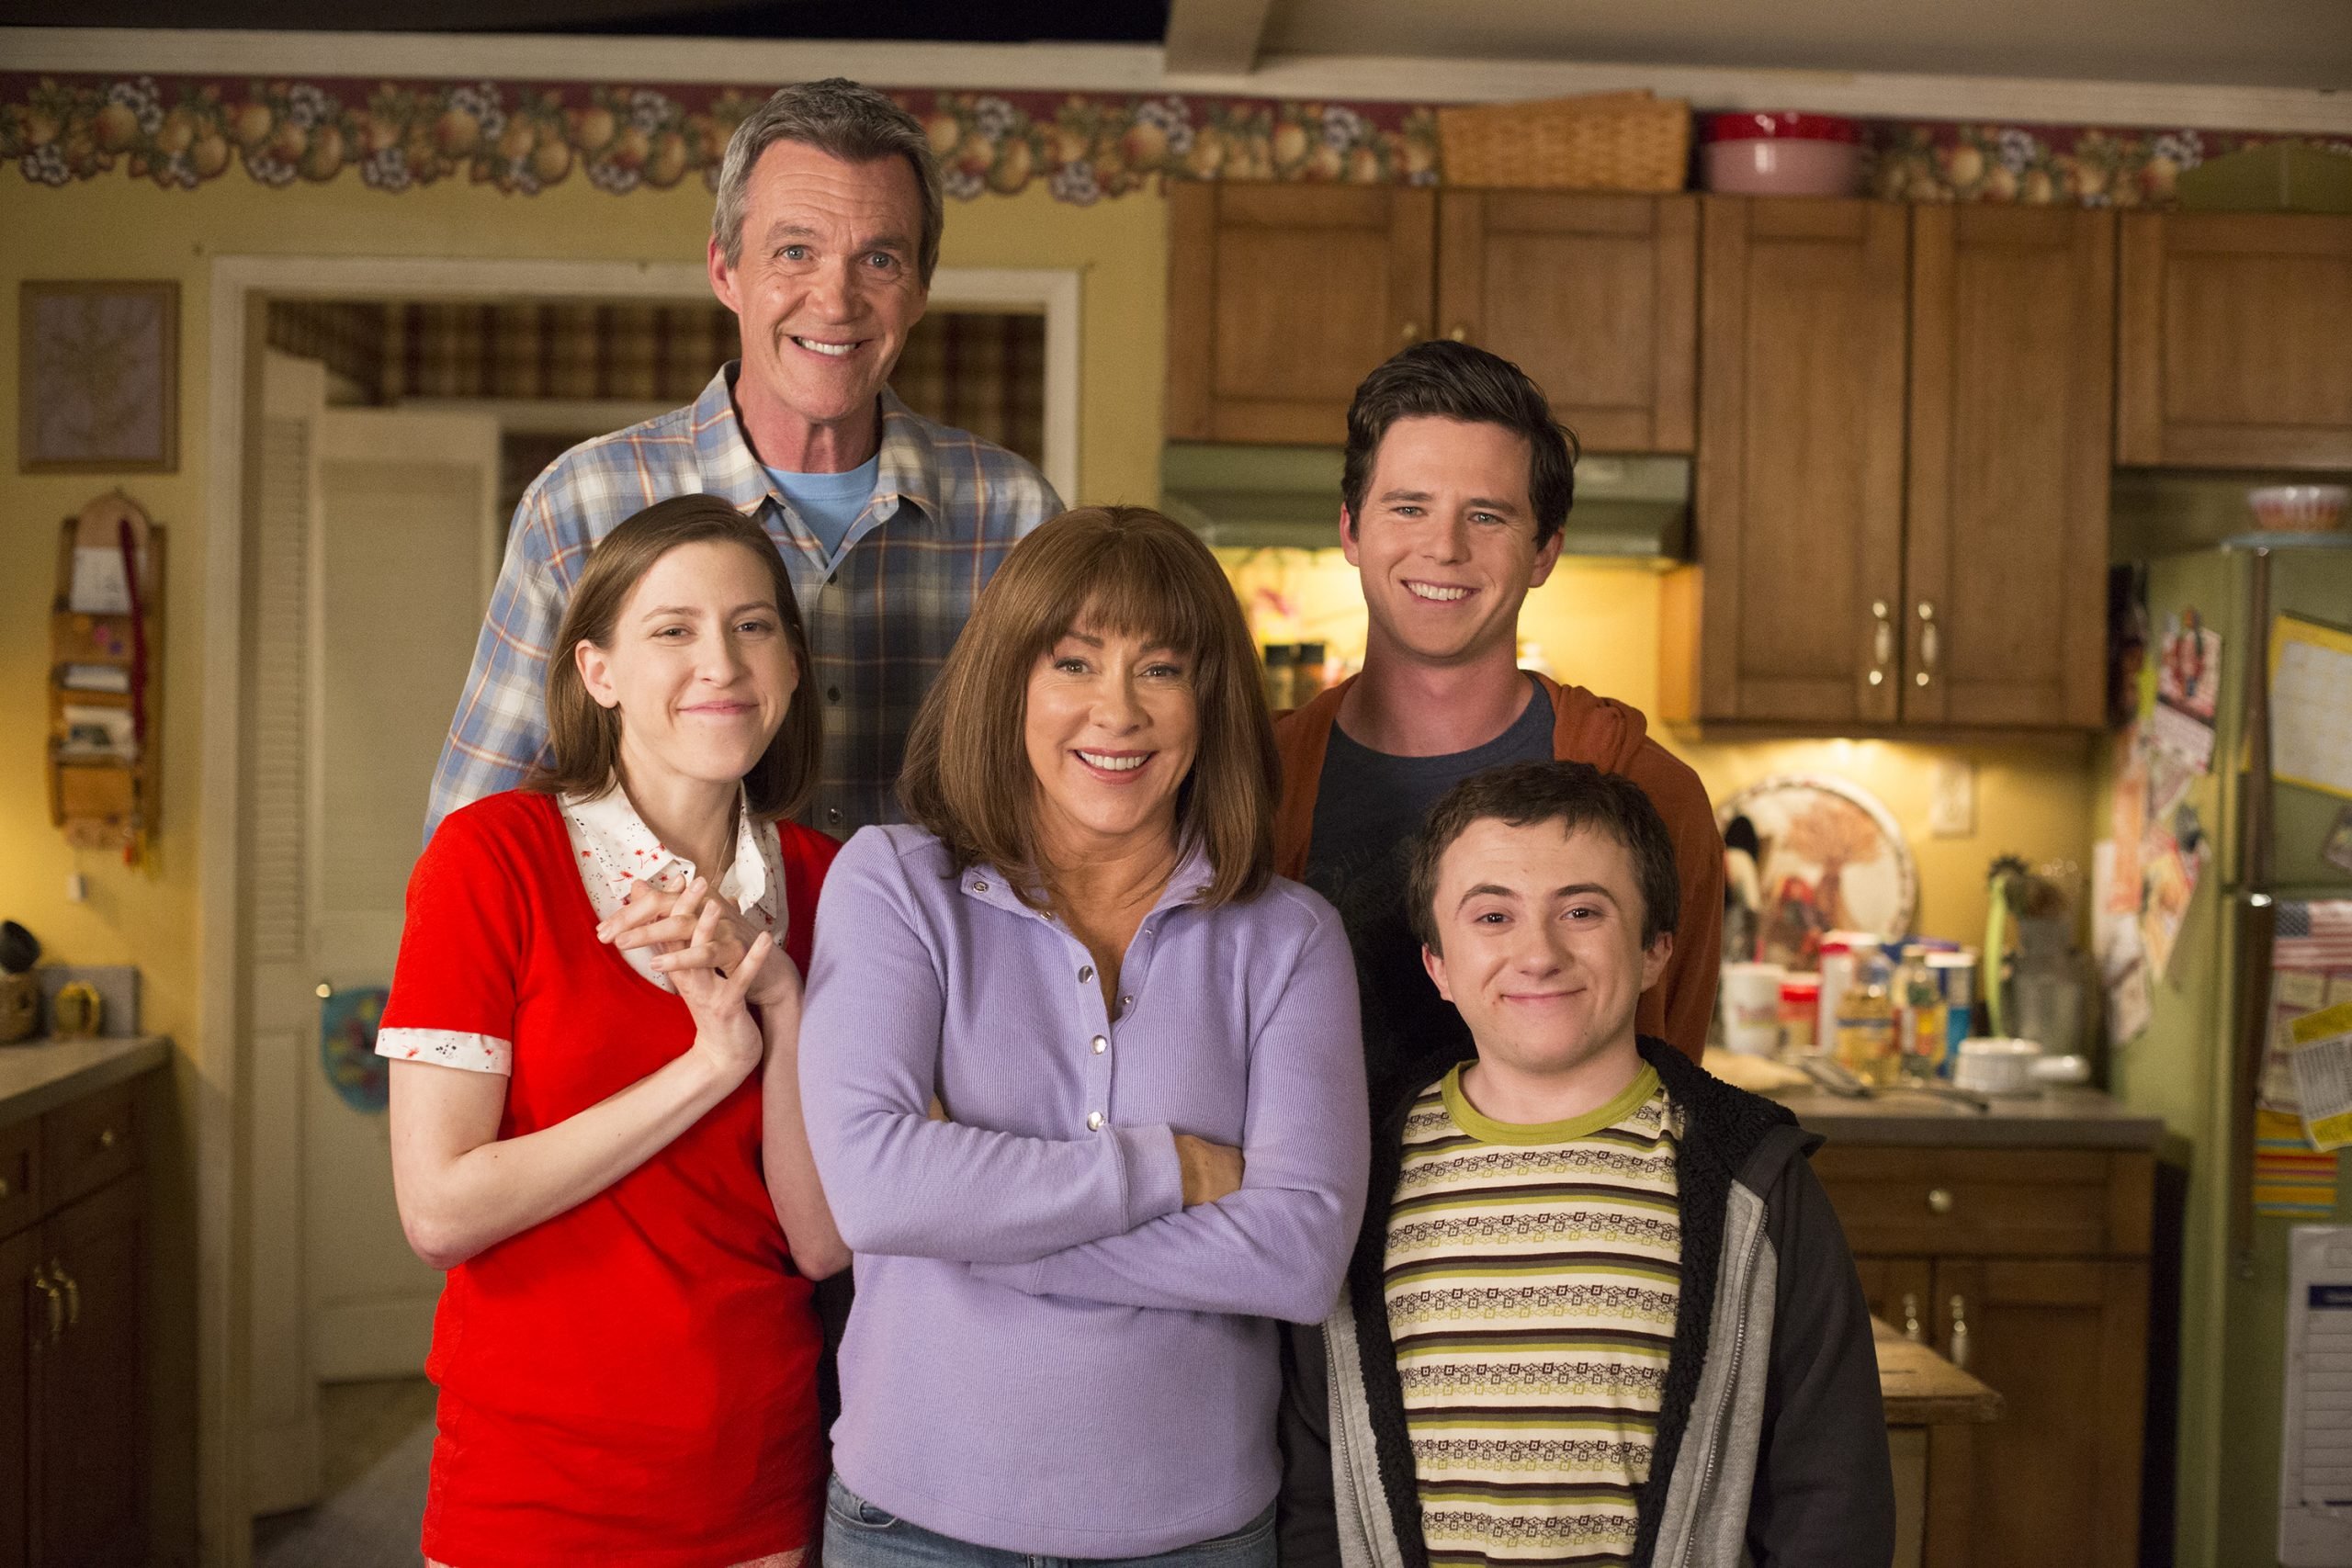 The cast of ABC's 'The Middle,' from left to right: Eden Sher, Neil Flynn, Patricia Heaton, Charlie McDermott, and Atticus Shaffer